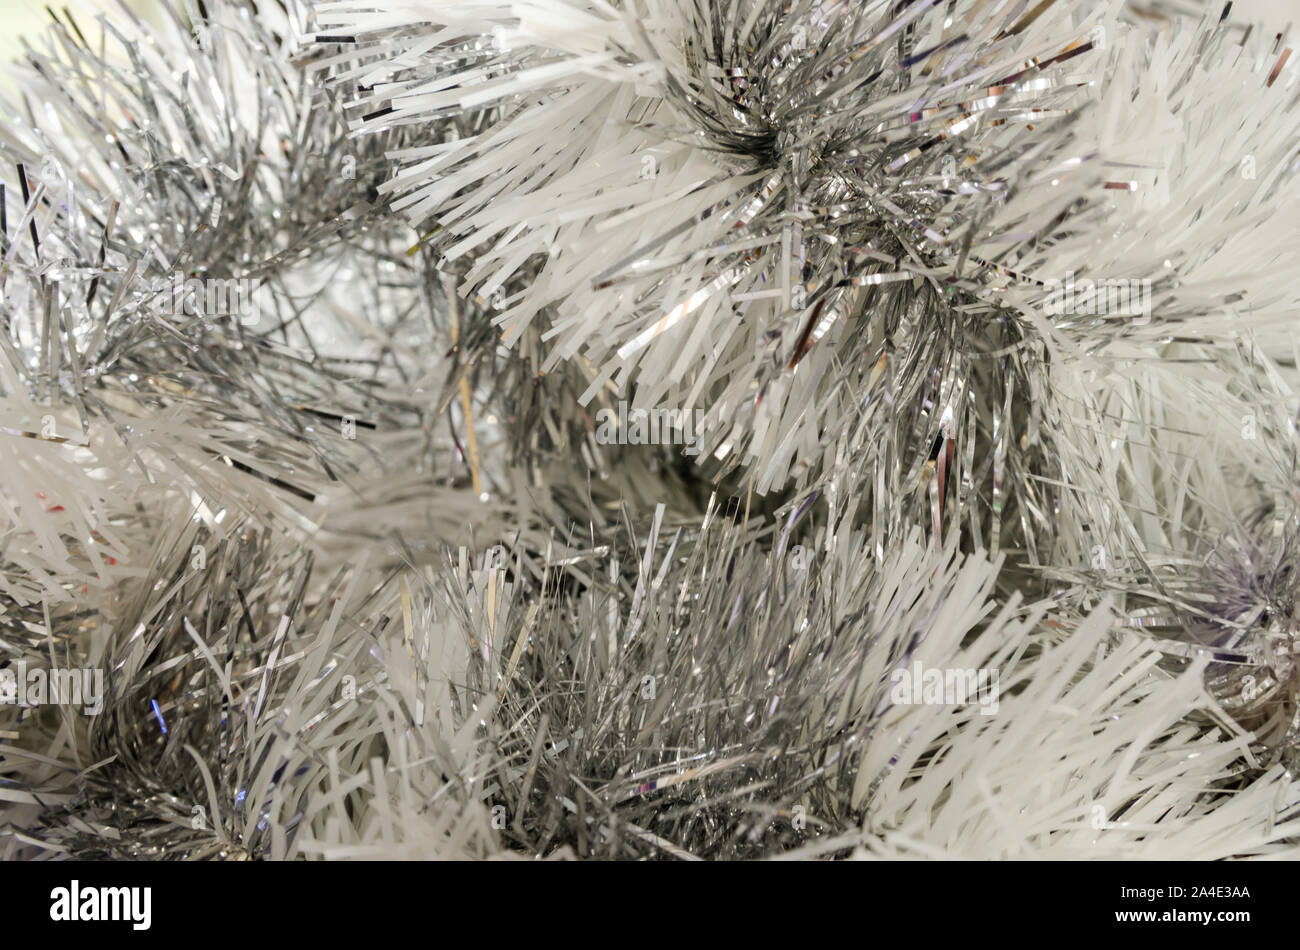 Abstract festive image in silver tone for Christmas or Happy new year background. Close up of hanging holiday tinsel garland. Stock Photo